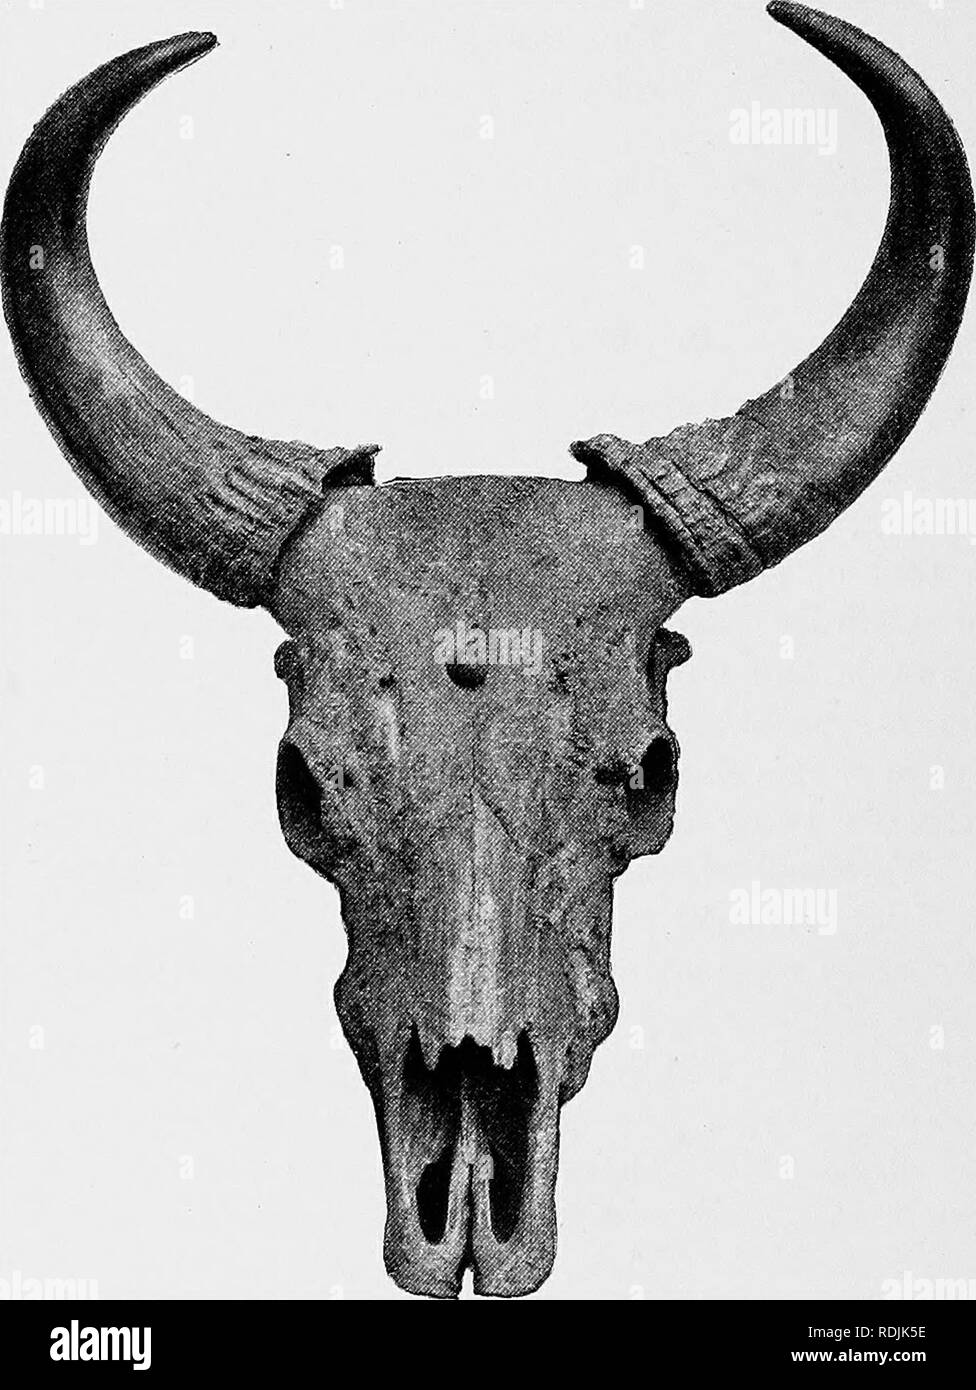 . Catalogue of the ungulate mammals in the British Museum (Natural History). Ungulates. 26 CATALOQUE OF UNGULATES 79. 3. 5. 14. A pair of horns. Sarawak, N&quot;. Borneo. Fur chased,^87 9. 86. 12. 2. 7. ) Two pairs of horns. Eejang Valley. 87. 2. 10. 8. ) Presented hy H. B. Low, Esq., 1886-7. Fig. 12.—Skull akd Hoehs of Bobnean Baktih&quot; (Bos banteng lowi). 87. 2. 10. 9. Immature frontlet, with one horn. Eejang Valley. Savie history. 0. 3. 30. 8. Fore part of skull and horns of female. Baram, Sarawak. Presented hy Dr. G. Hose, 1900. The dimensions, in inches, of the specimens represented in Stock Photo